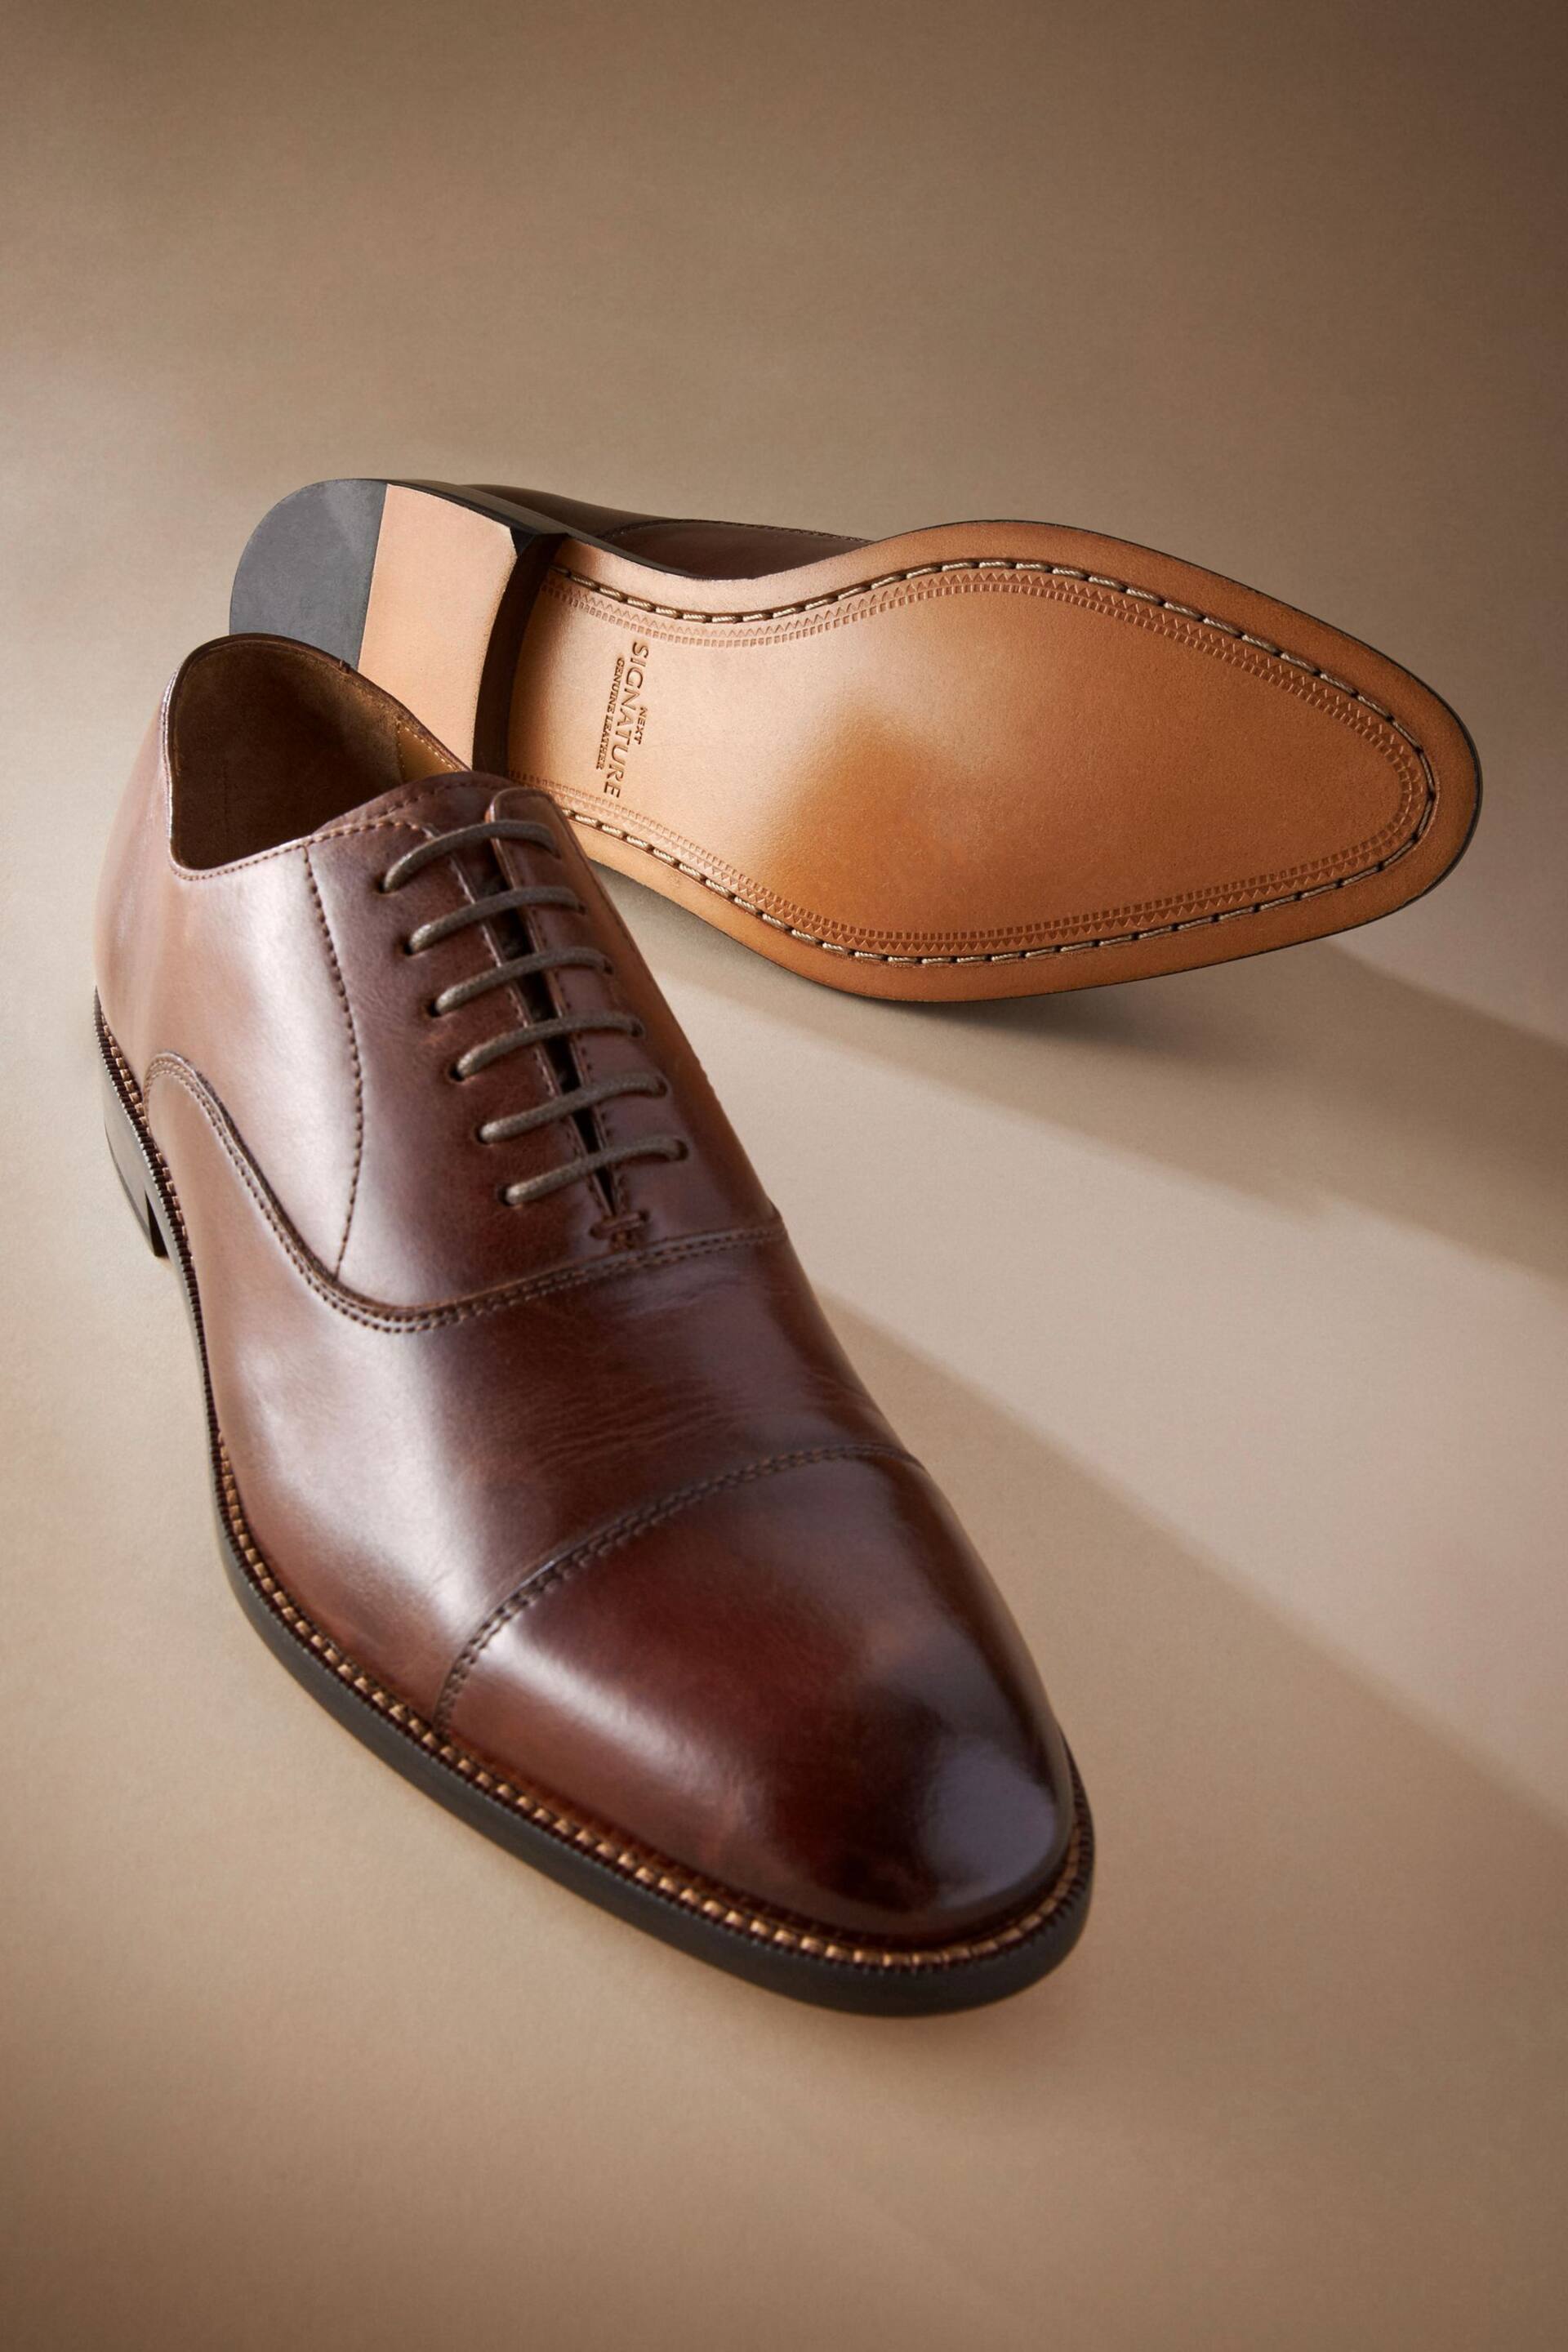 Tan Brown Signature Leather Sole Oxford Toe Cap Shoes - Image 4 of 5